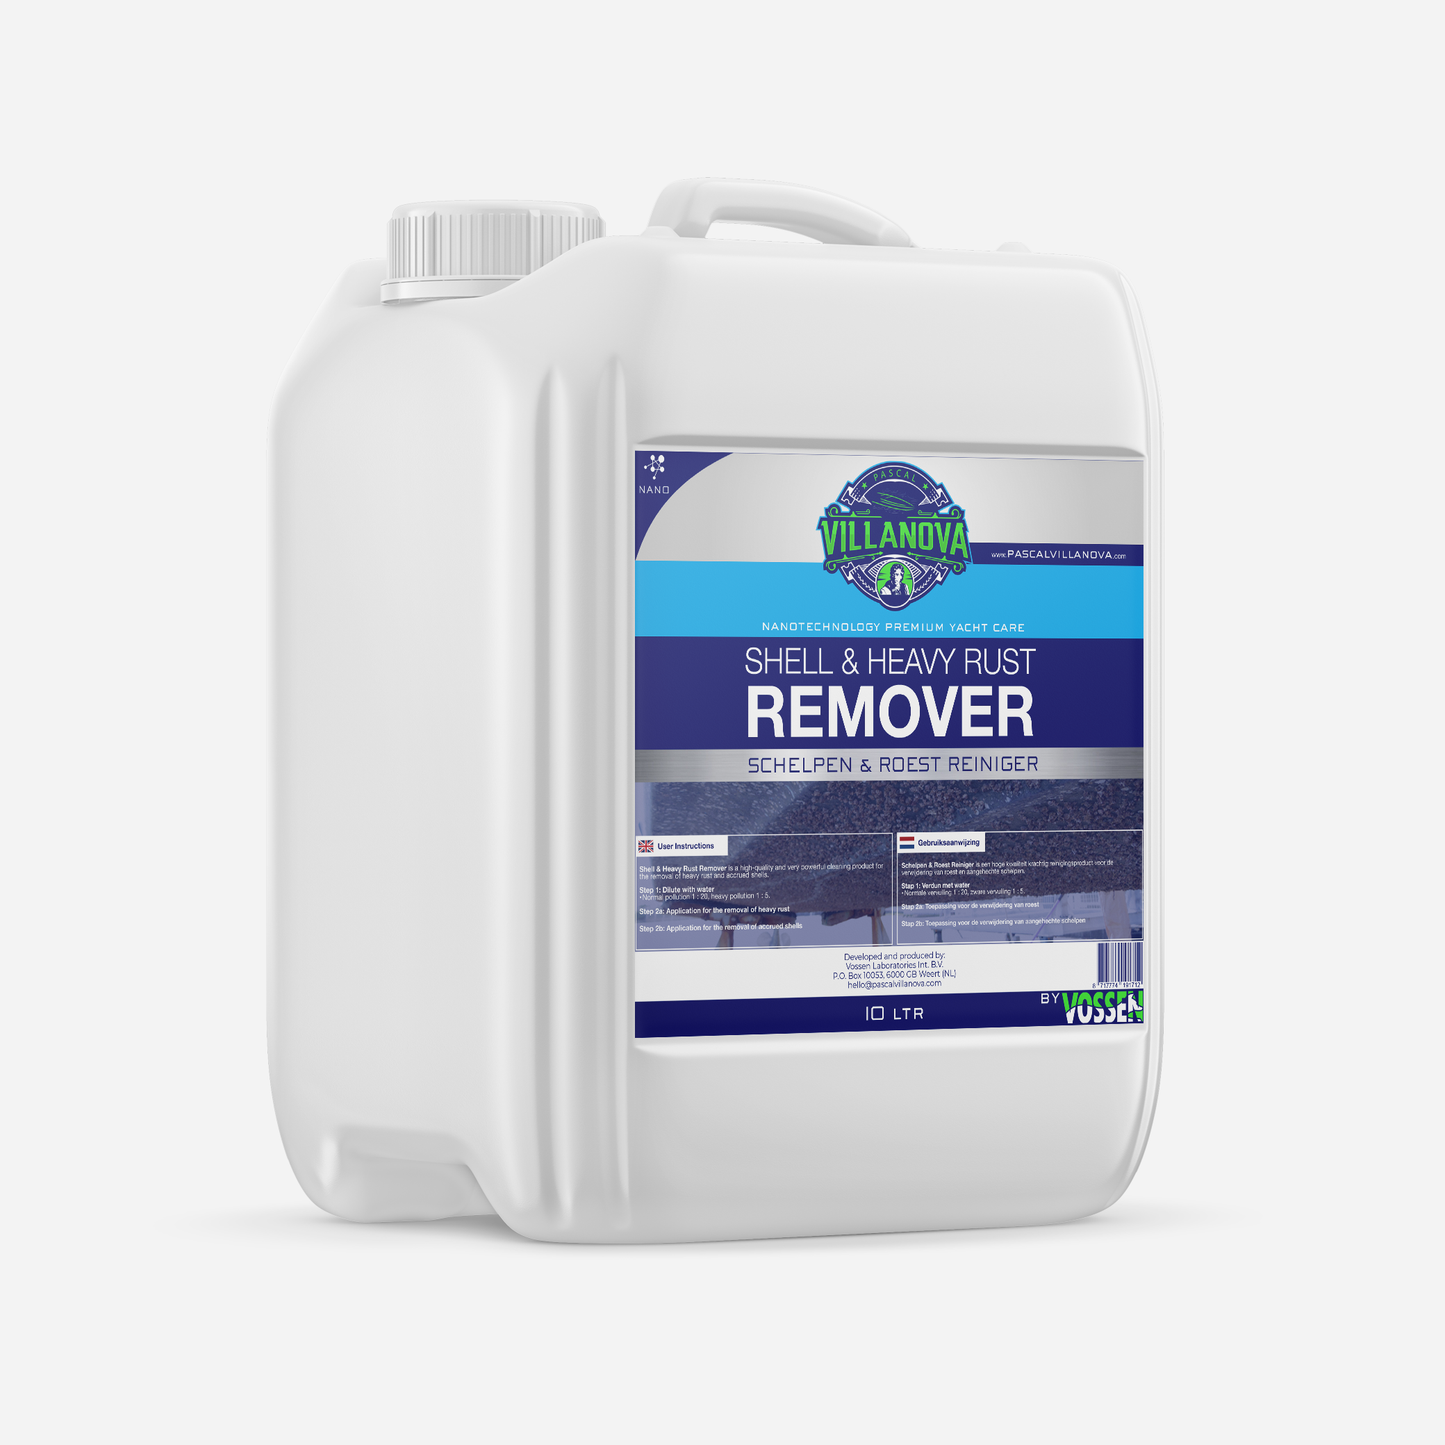 Shell & Heavy Rust Remover